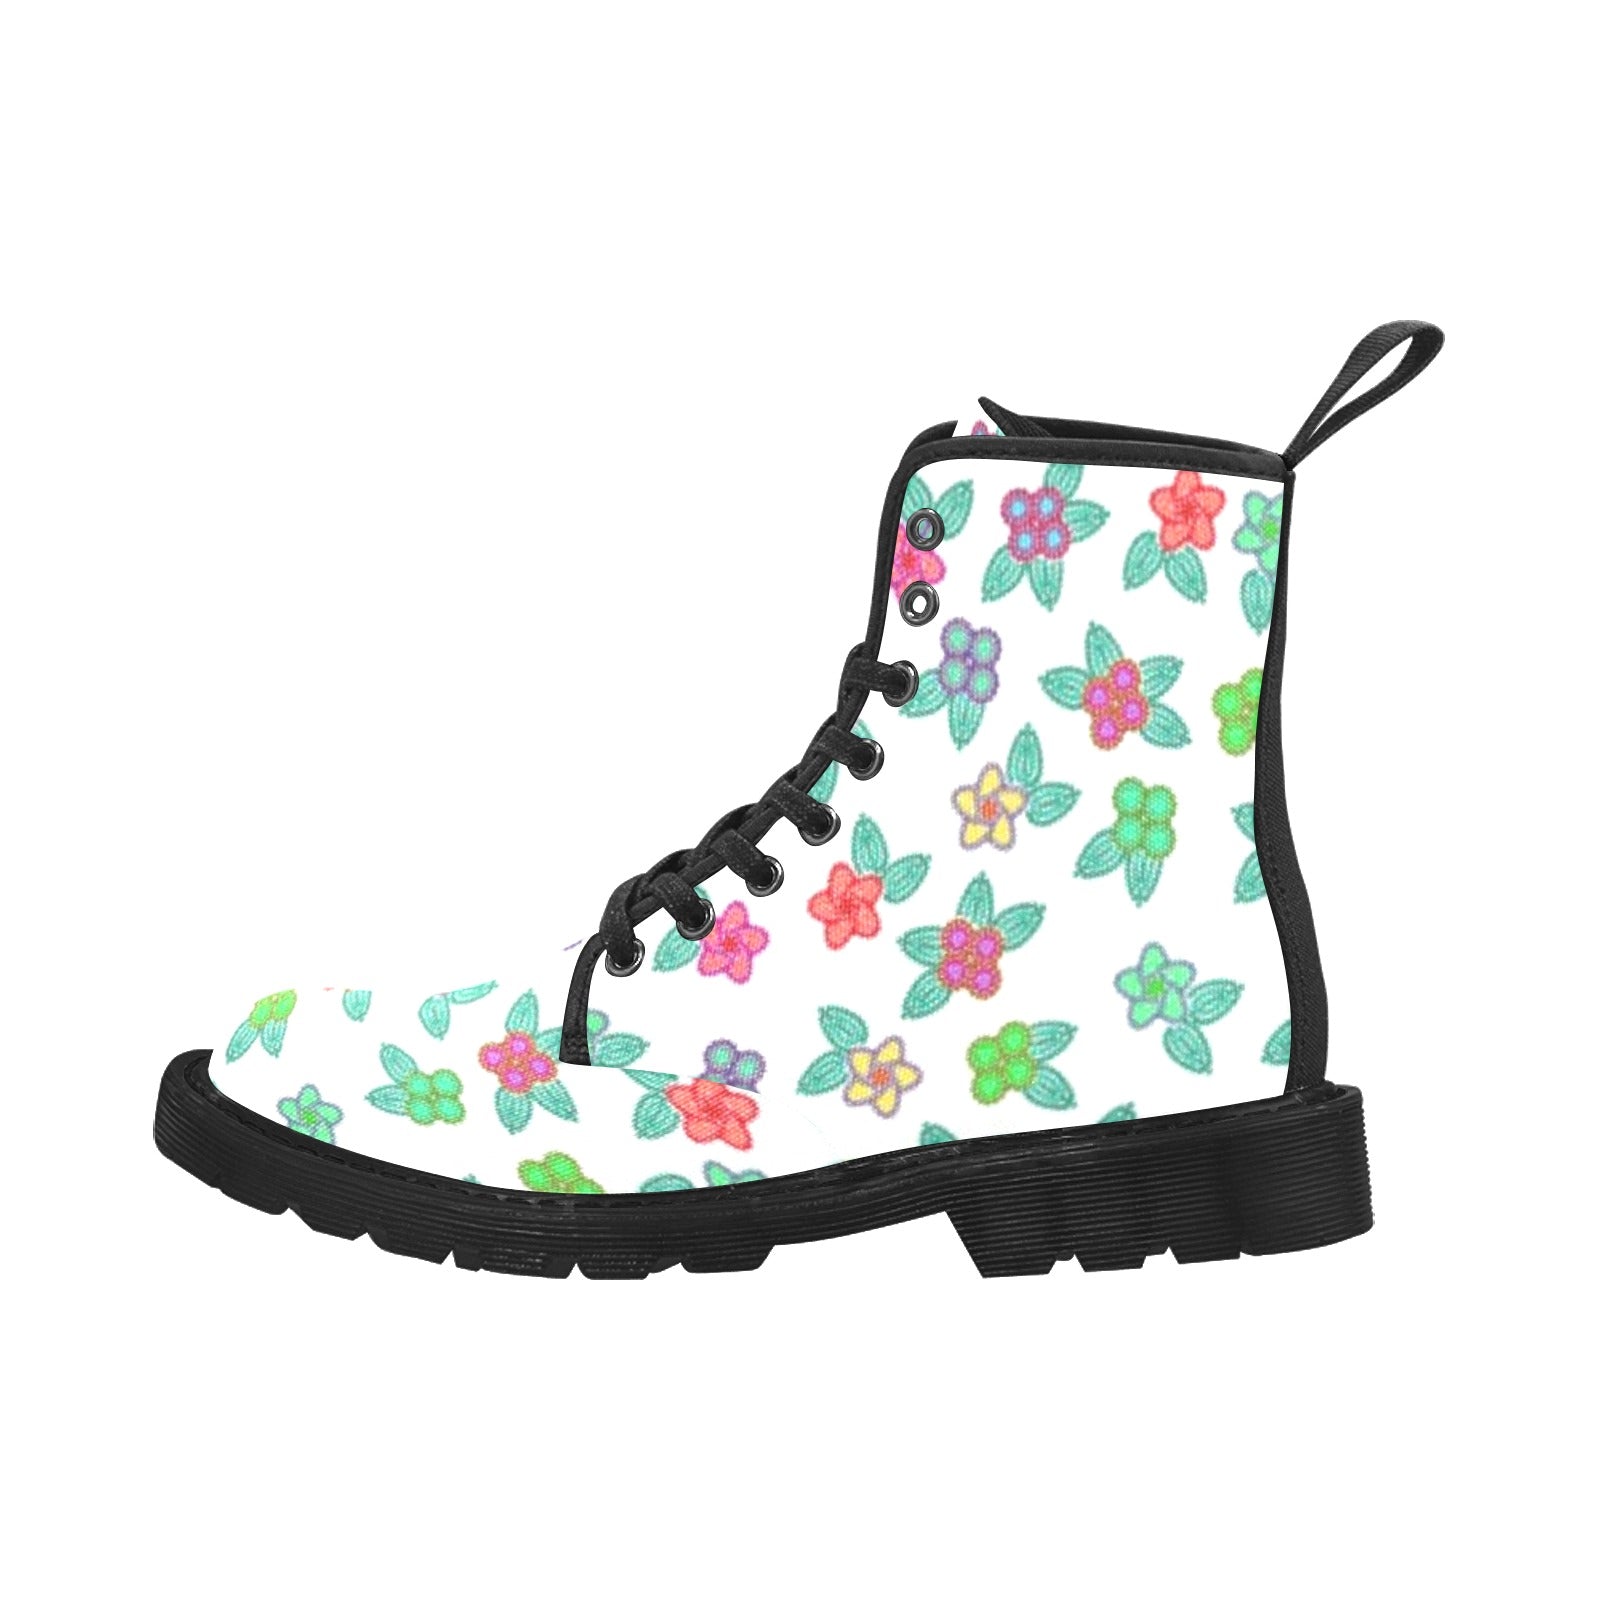 Berry Flowers White Boots for Women (Black)